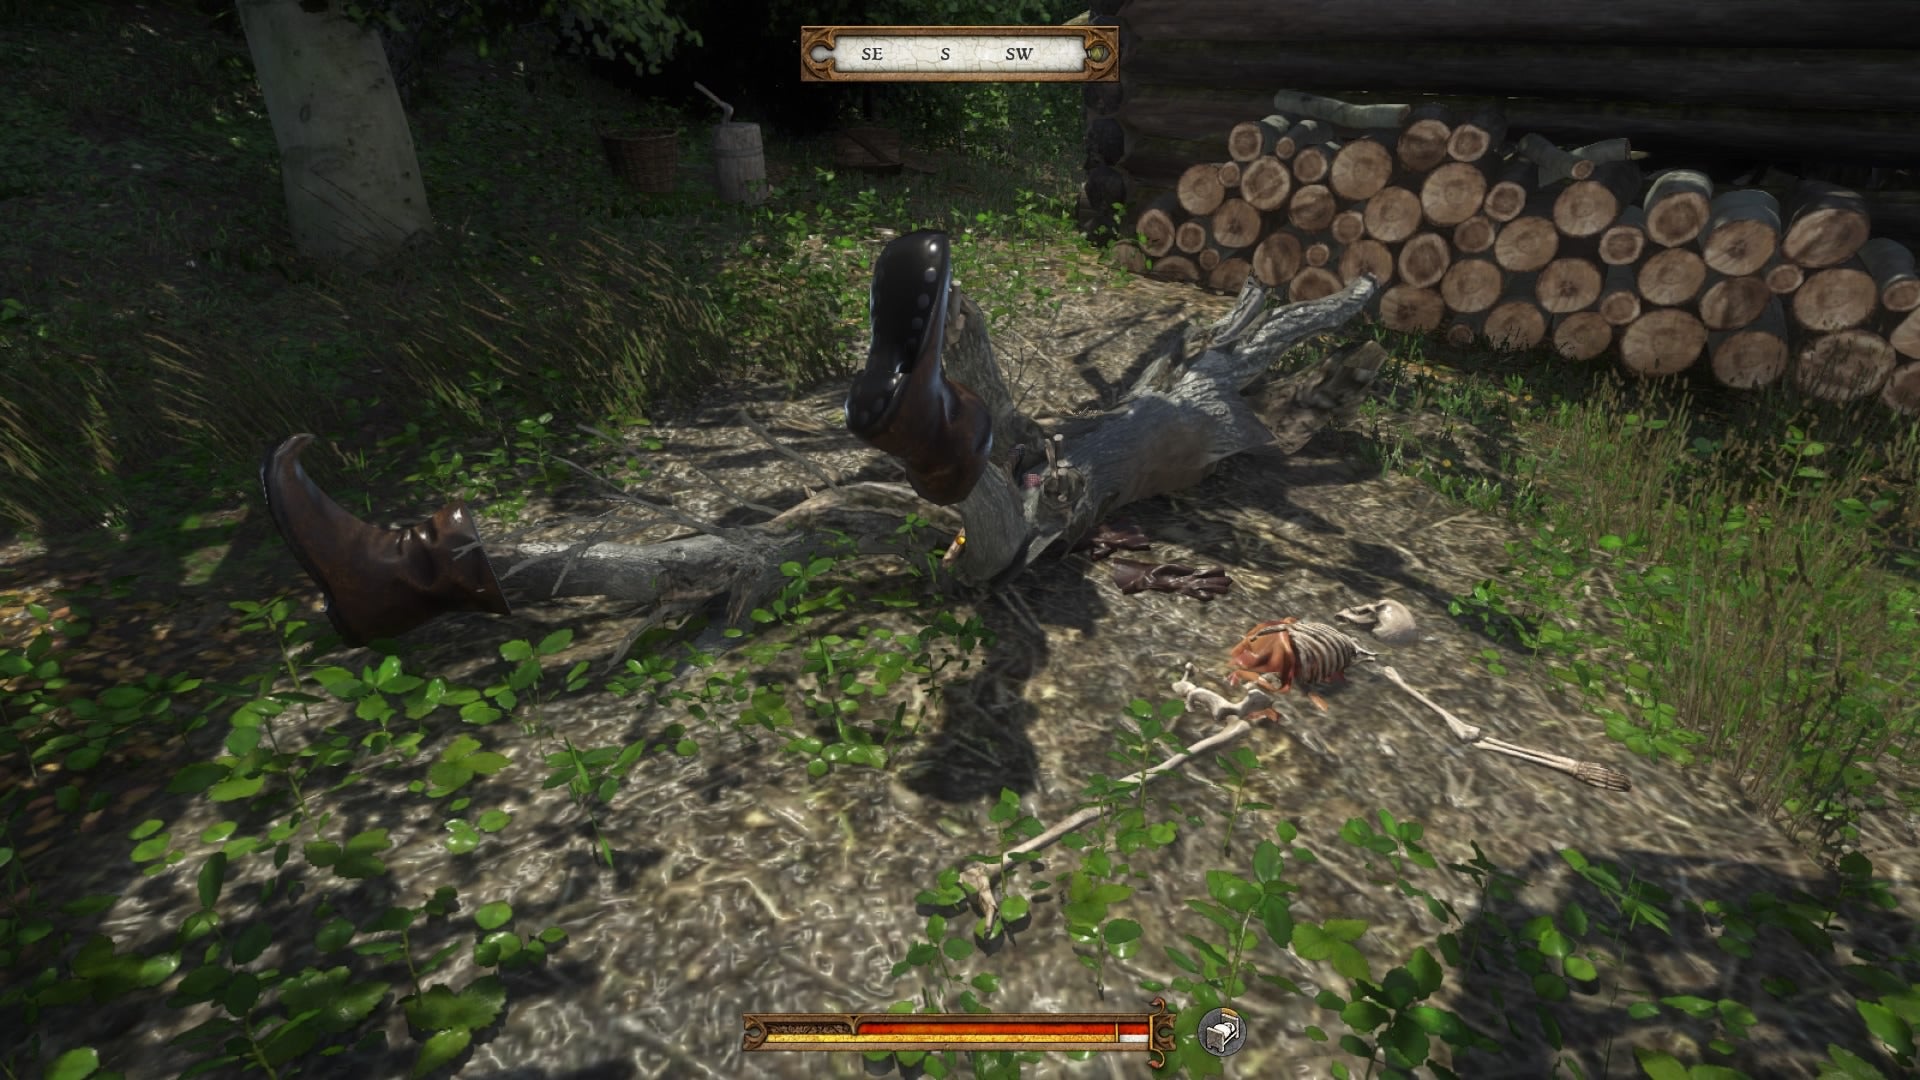 Image for Kingdom Come Deliverance Easter Eggs - Necronomicon, The Witcher, Lord of the Rings